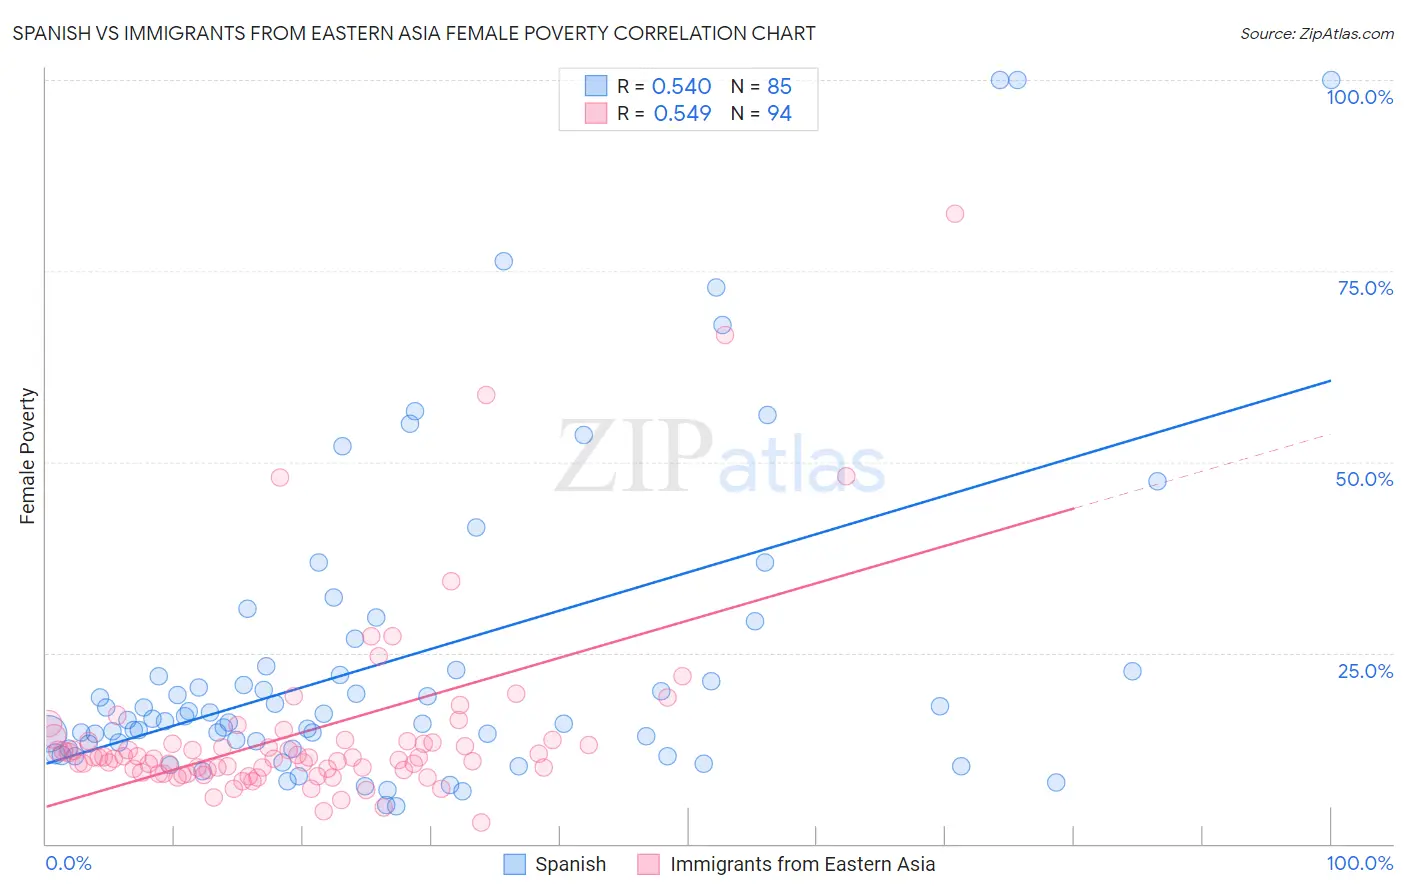 Spanish vs Immigrants from Eastern Asia Female Poverty